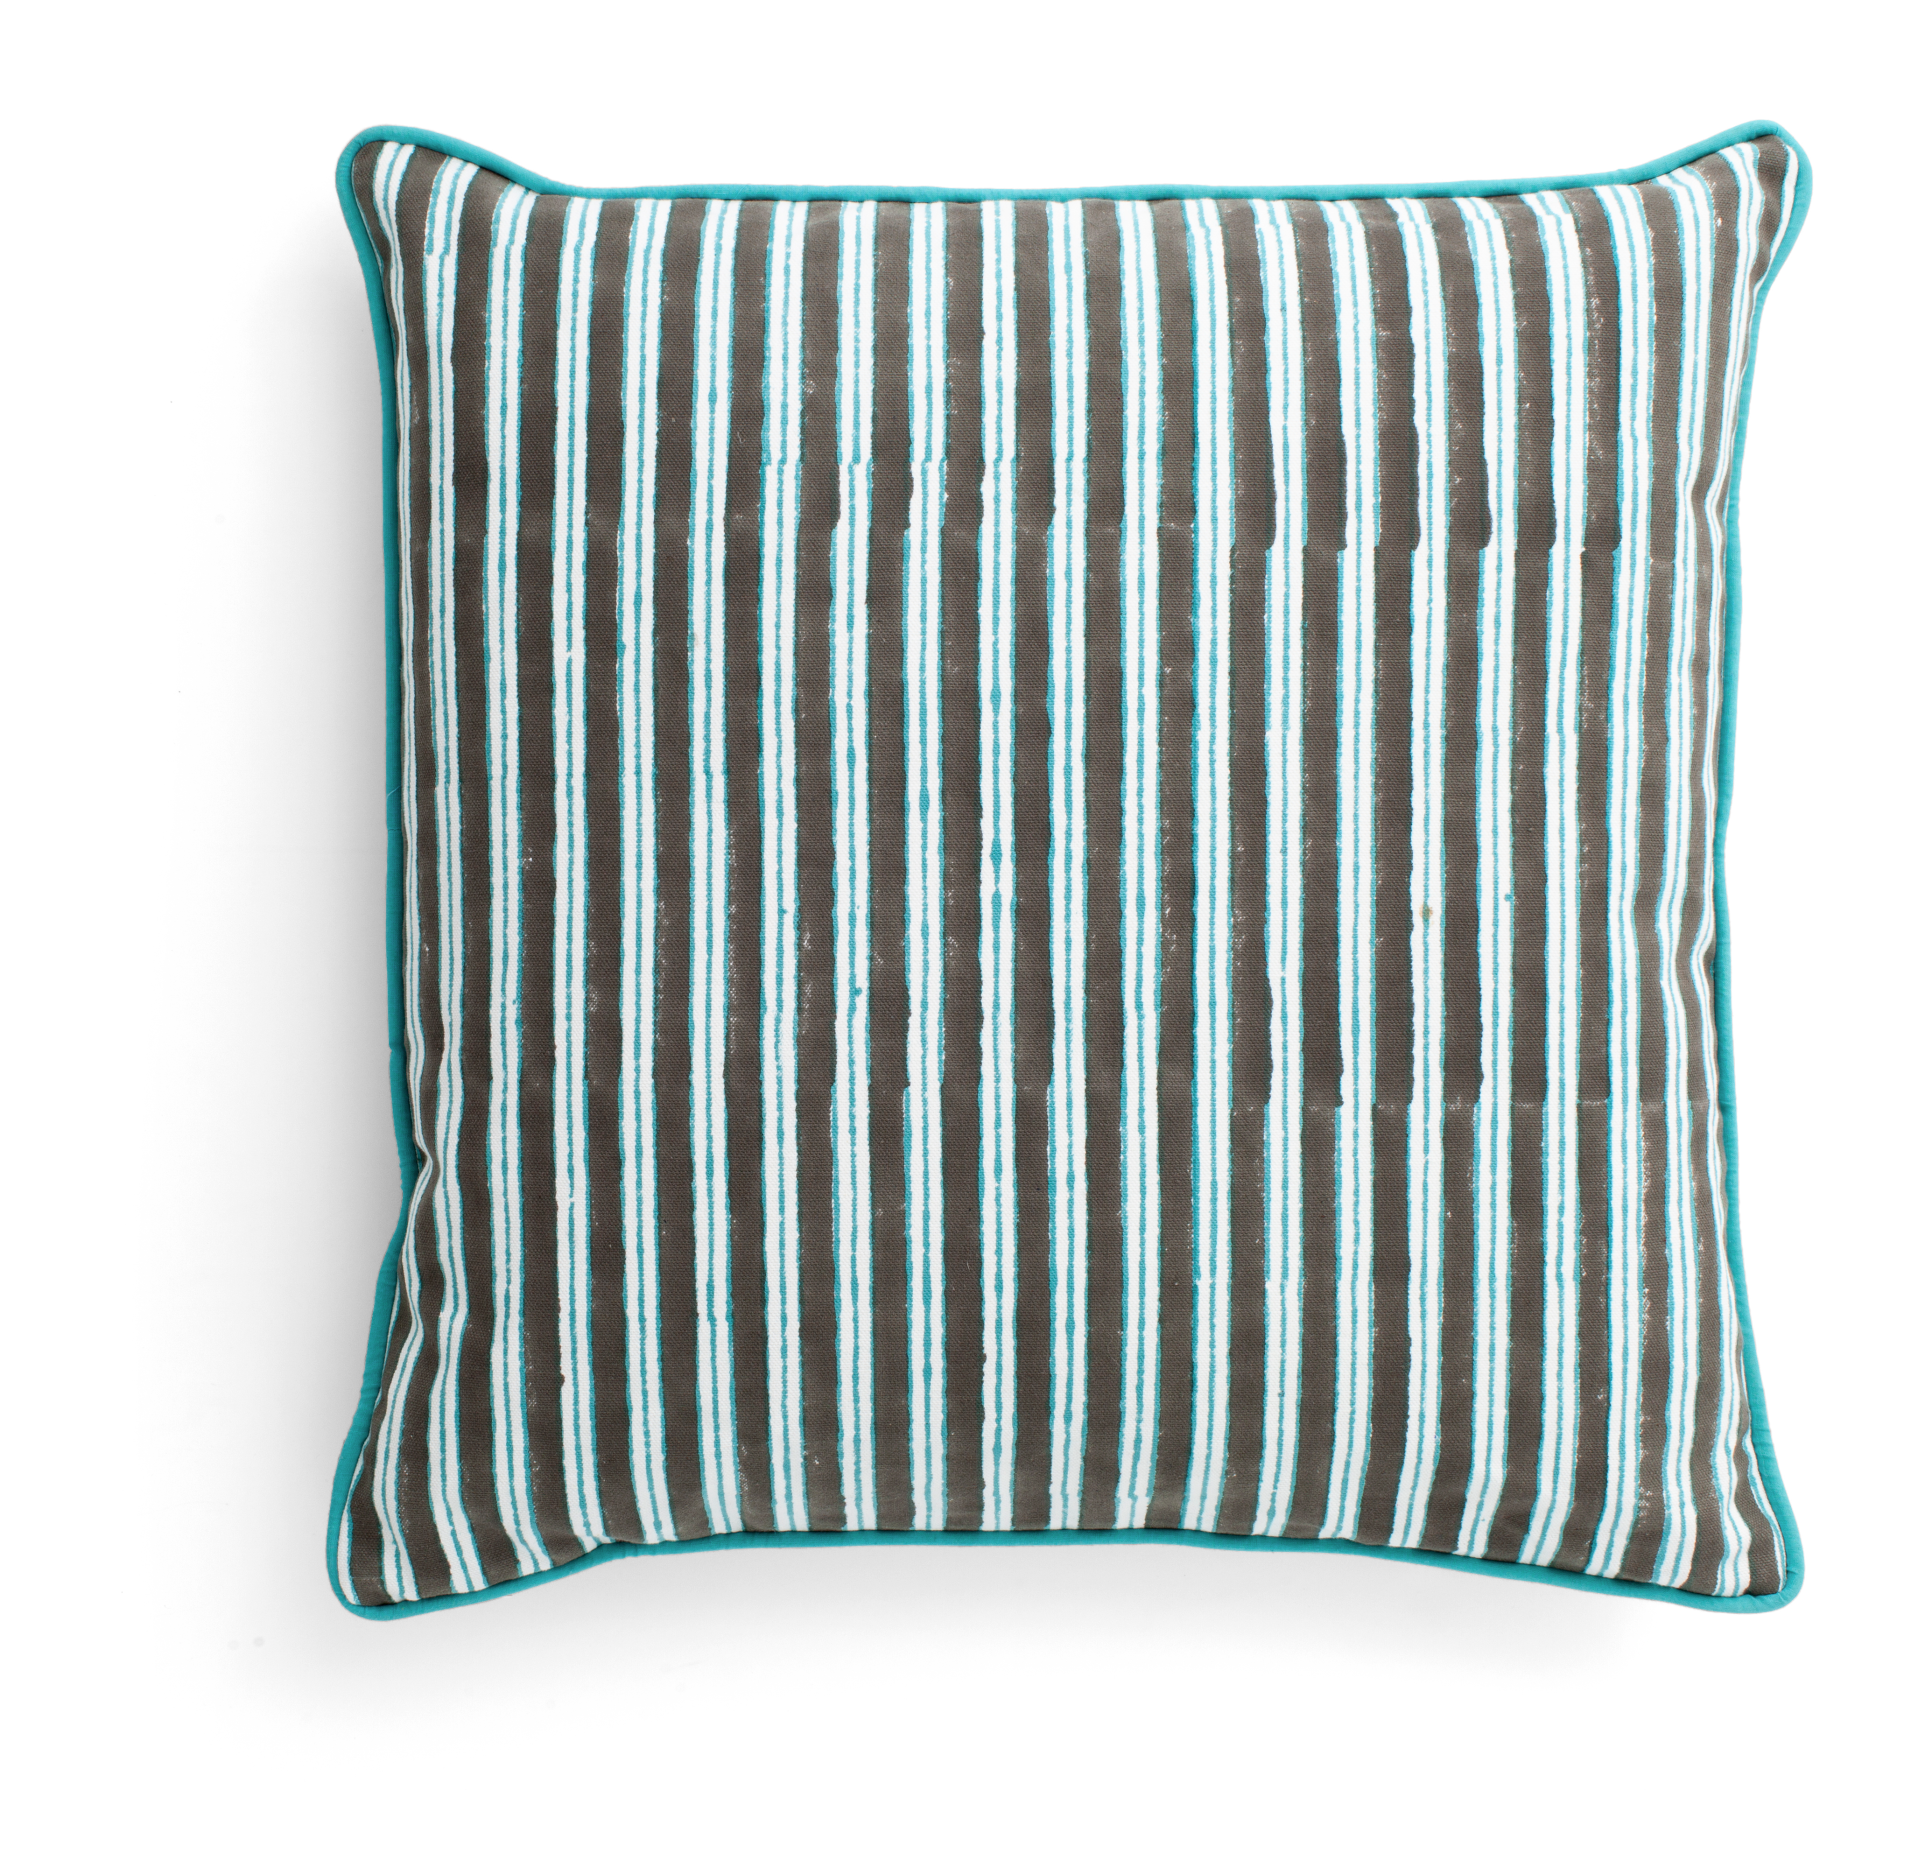 Indian Stripe Cushion in Turquoise and Grey